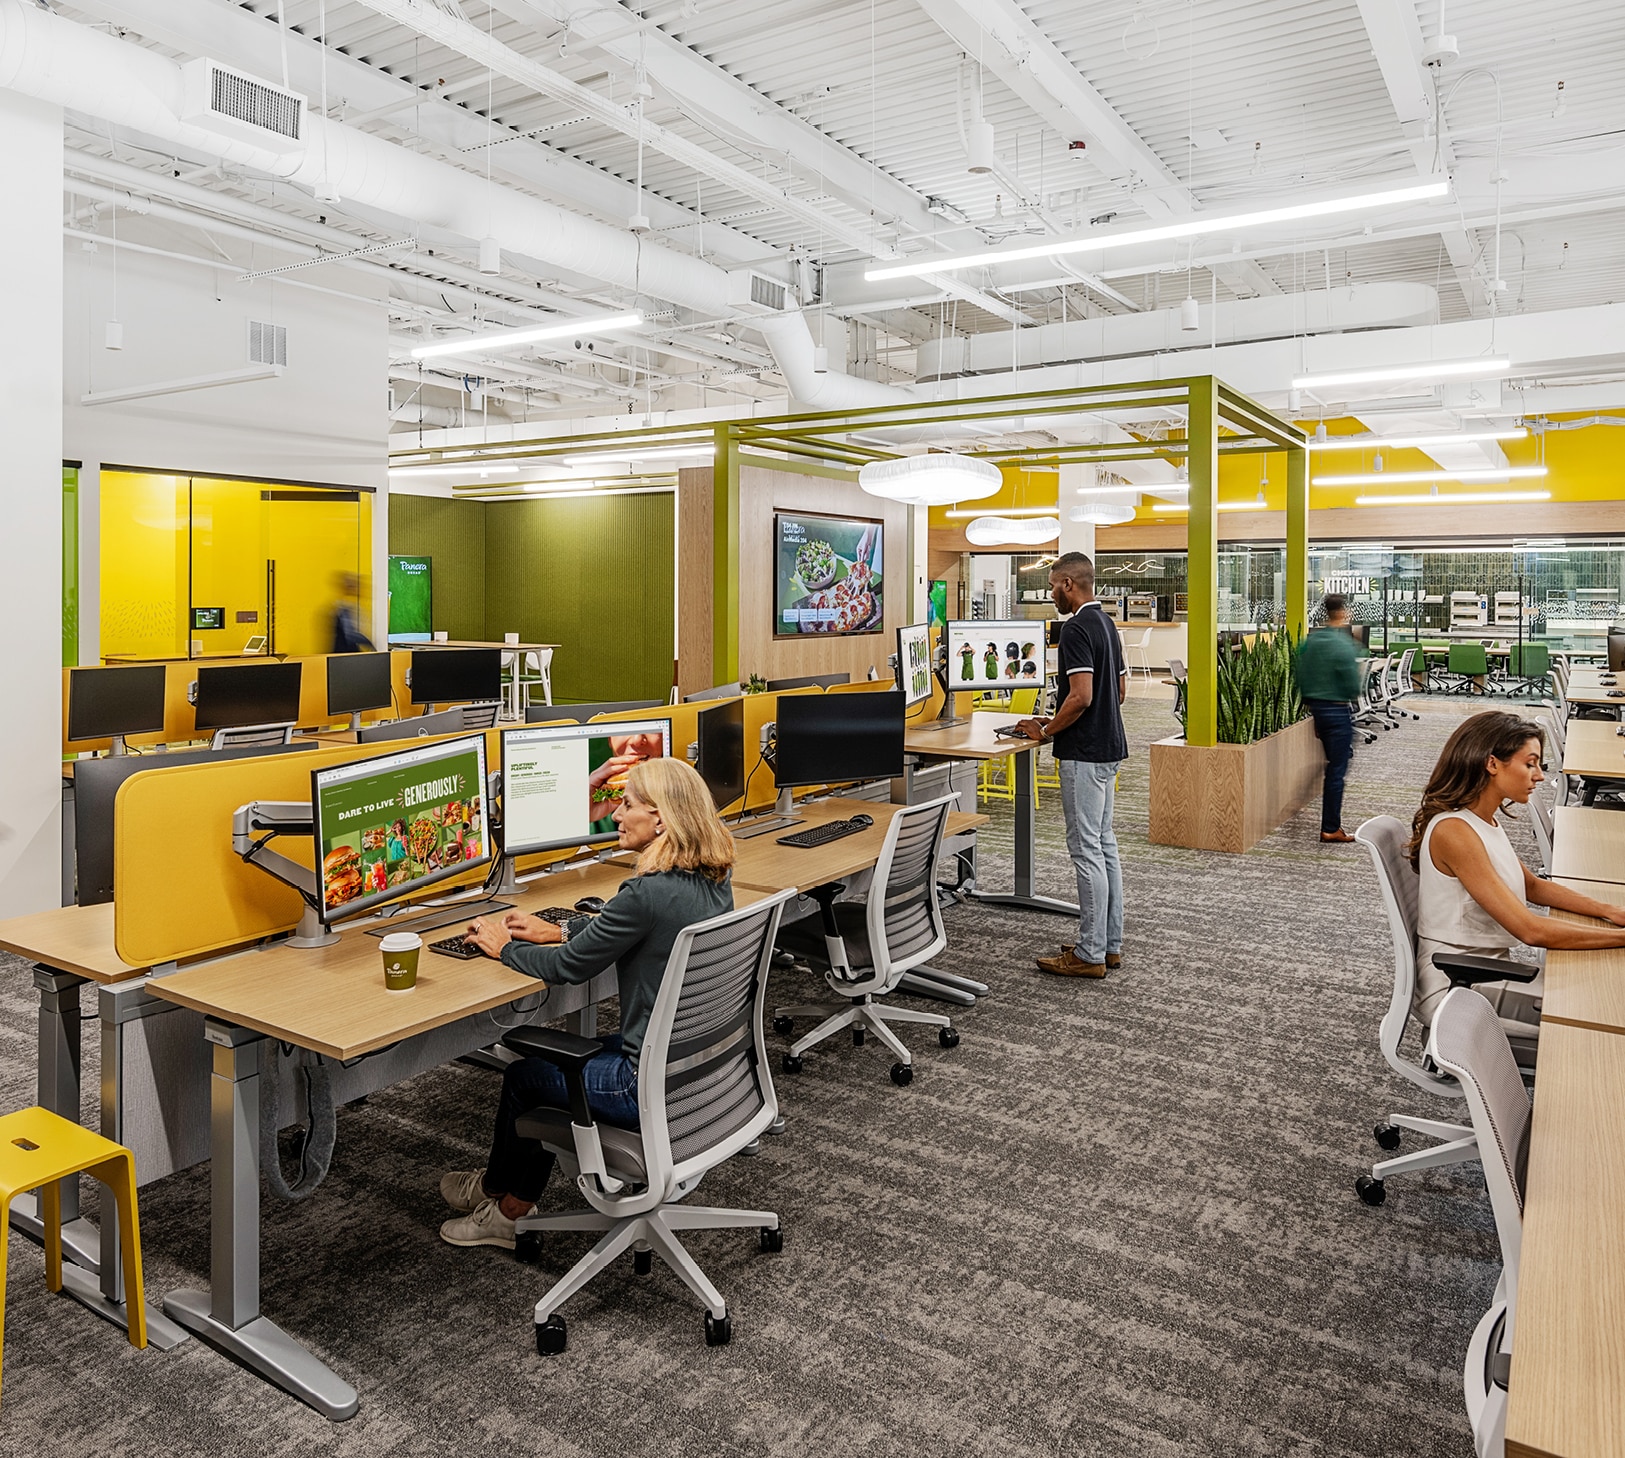 Step Inside Panera Bread's New Office for a Changing World